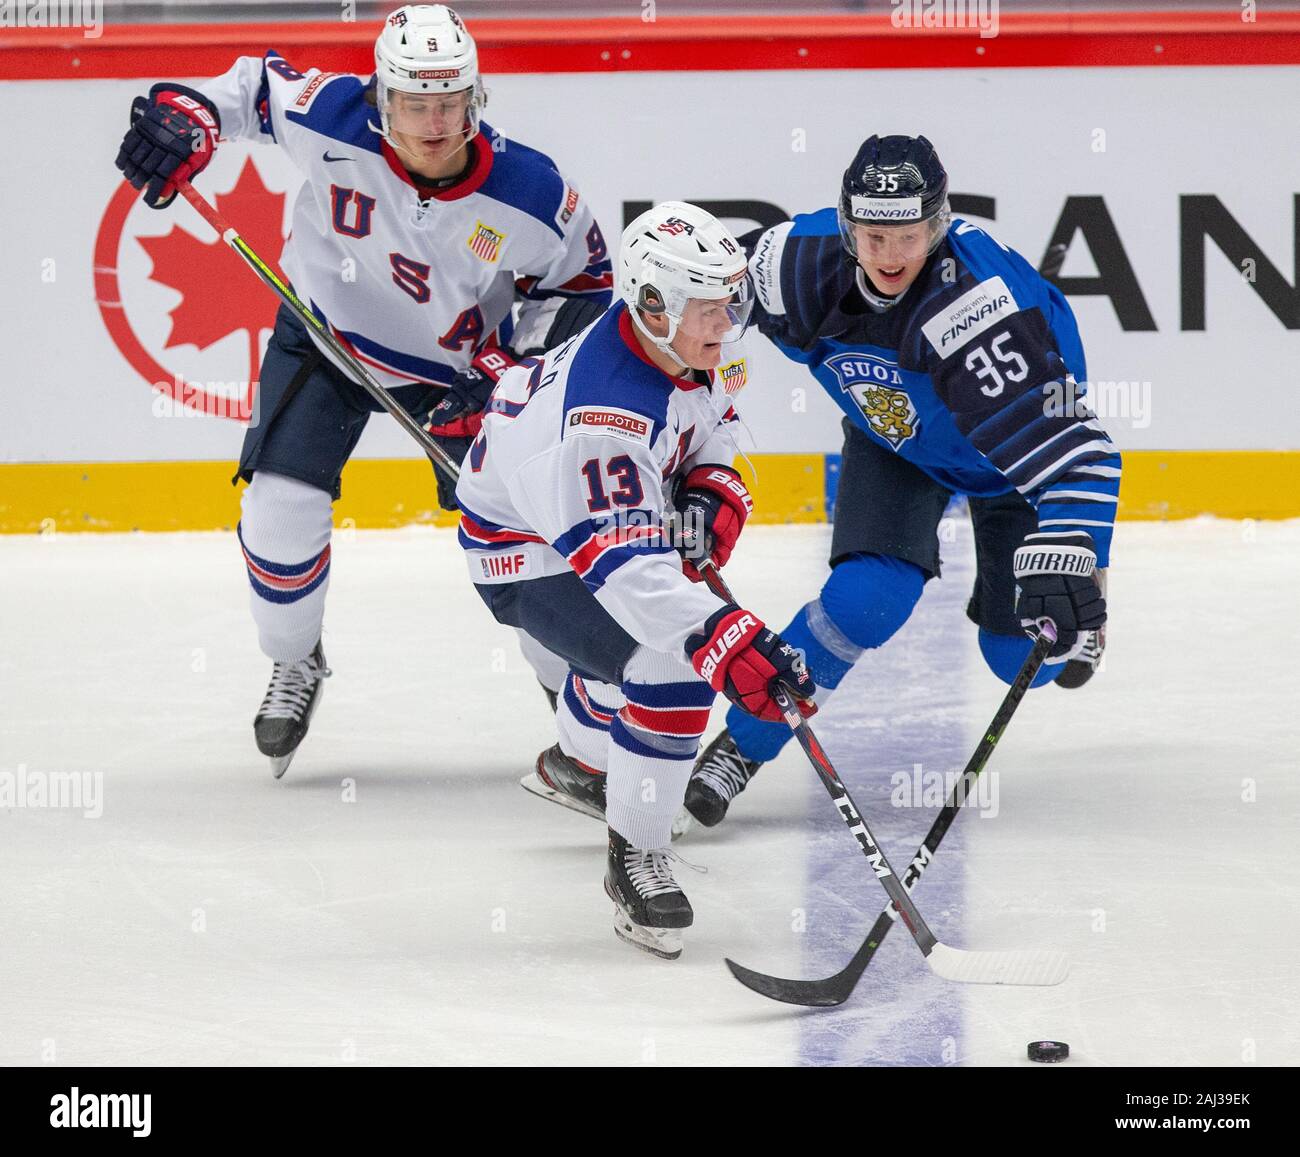 Trevor Zegras (USA) in action during the 2020 IIHF World Junior